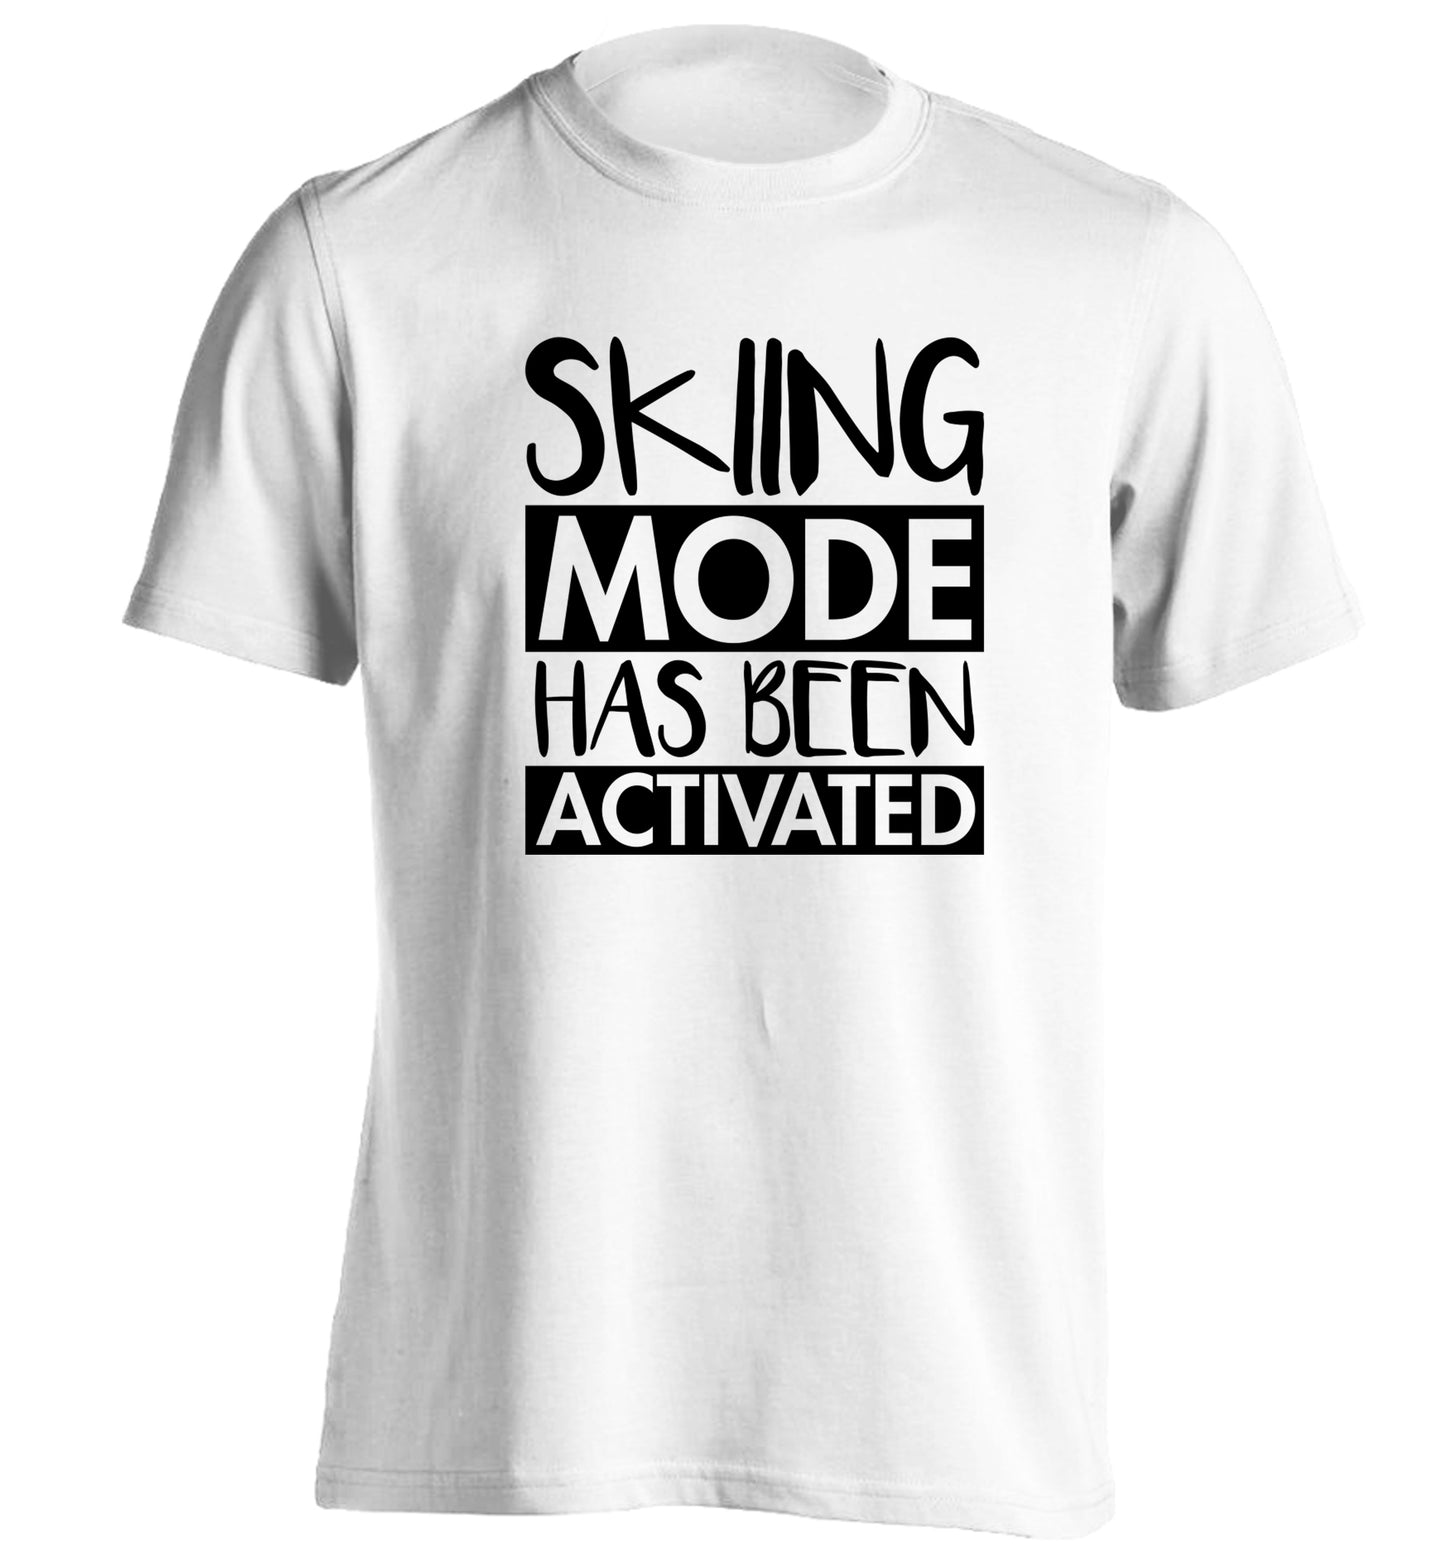 Skiing mode activated adults unisexwhite Tshirt 2XL